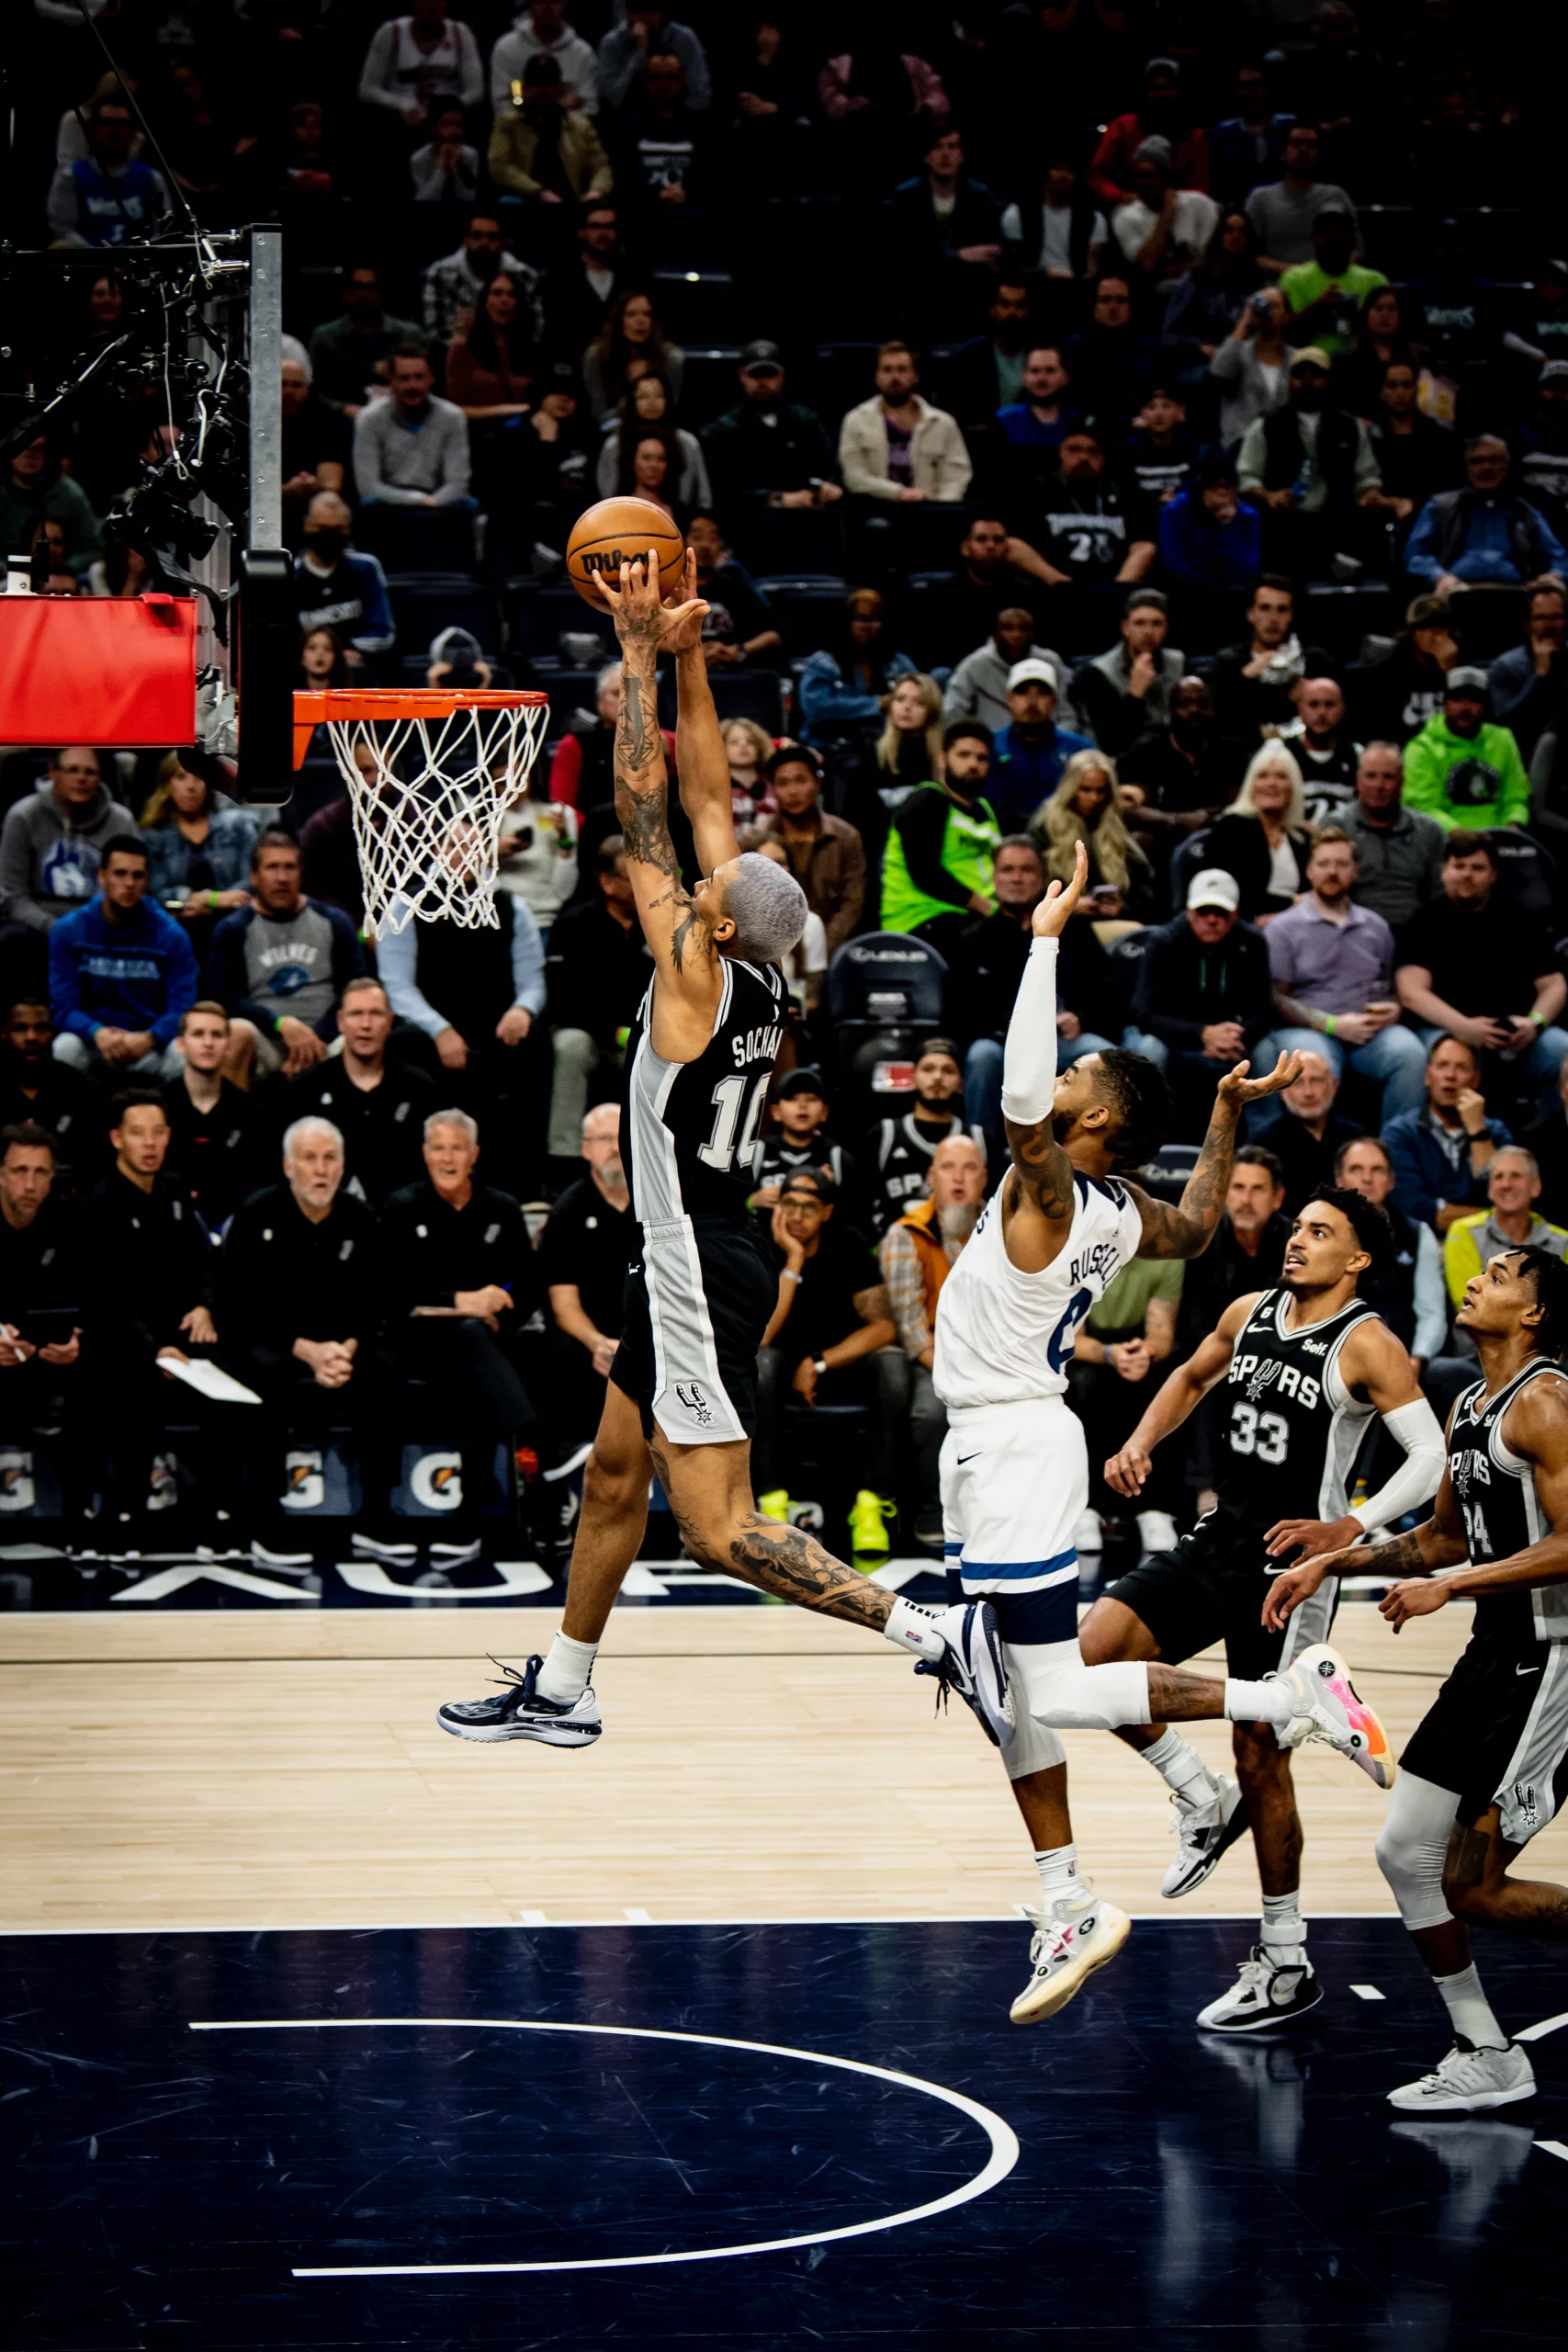 Jeremy Sochan dunking and not alloing the san antonio spurs to tank